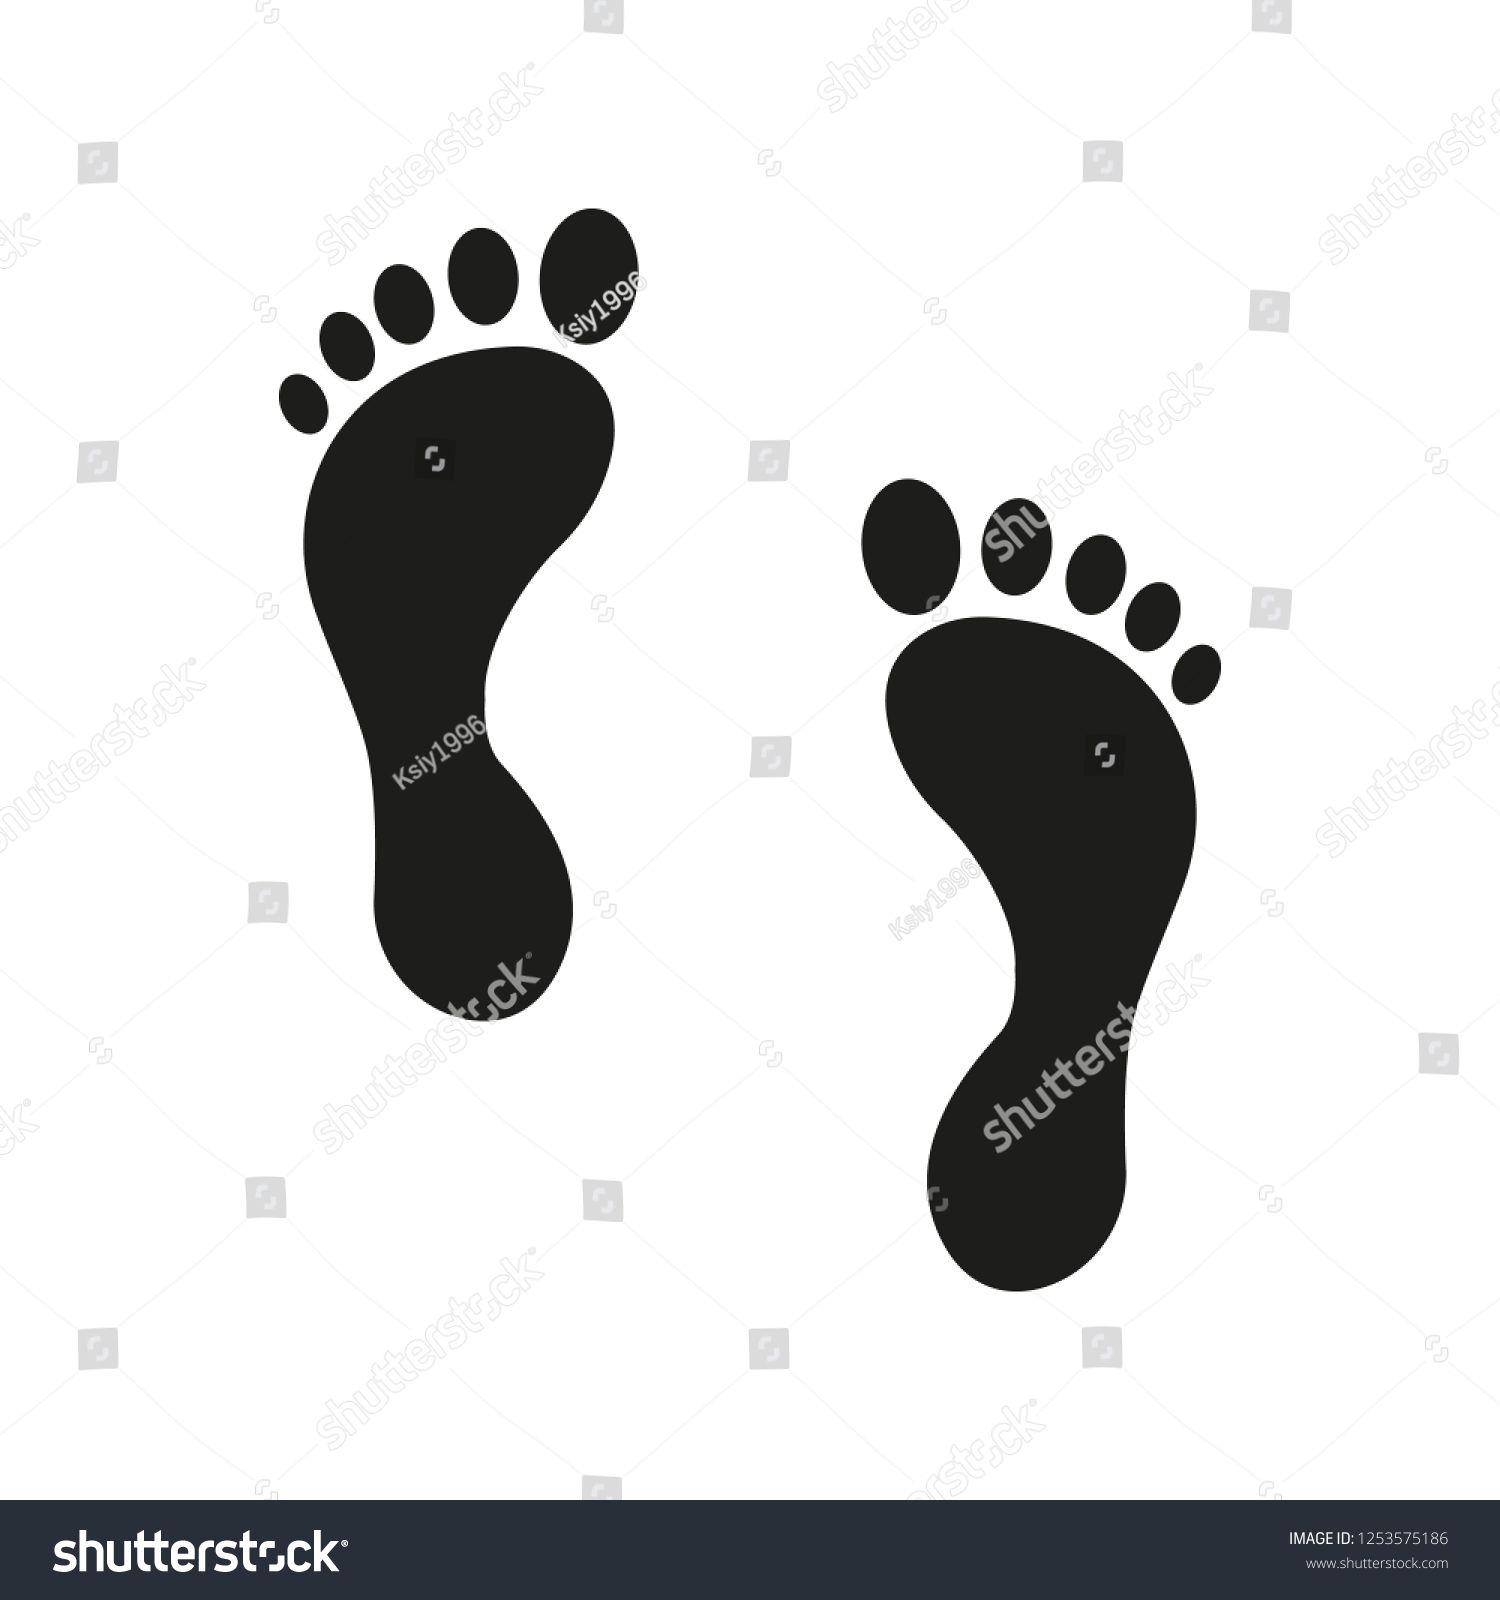 Footsteps clipart traces. Trace of human foot